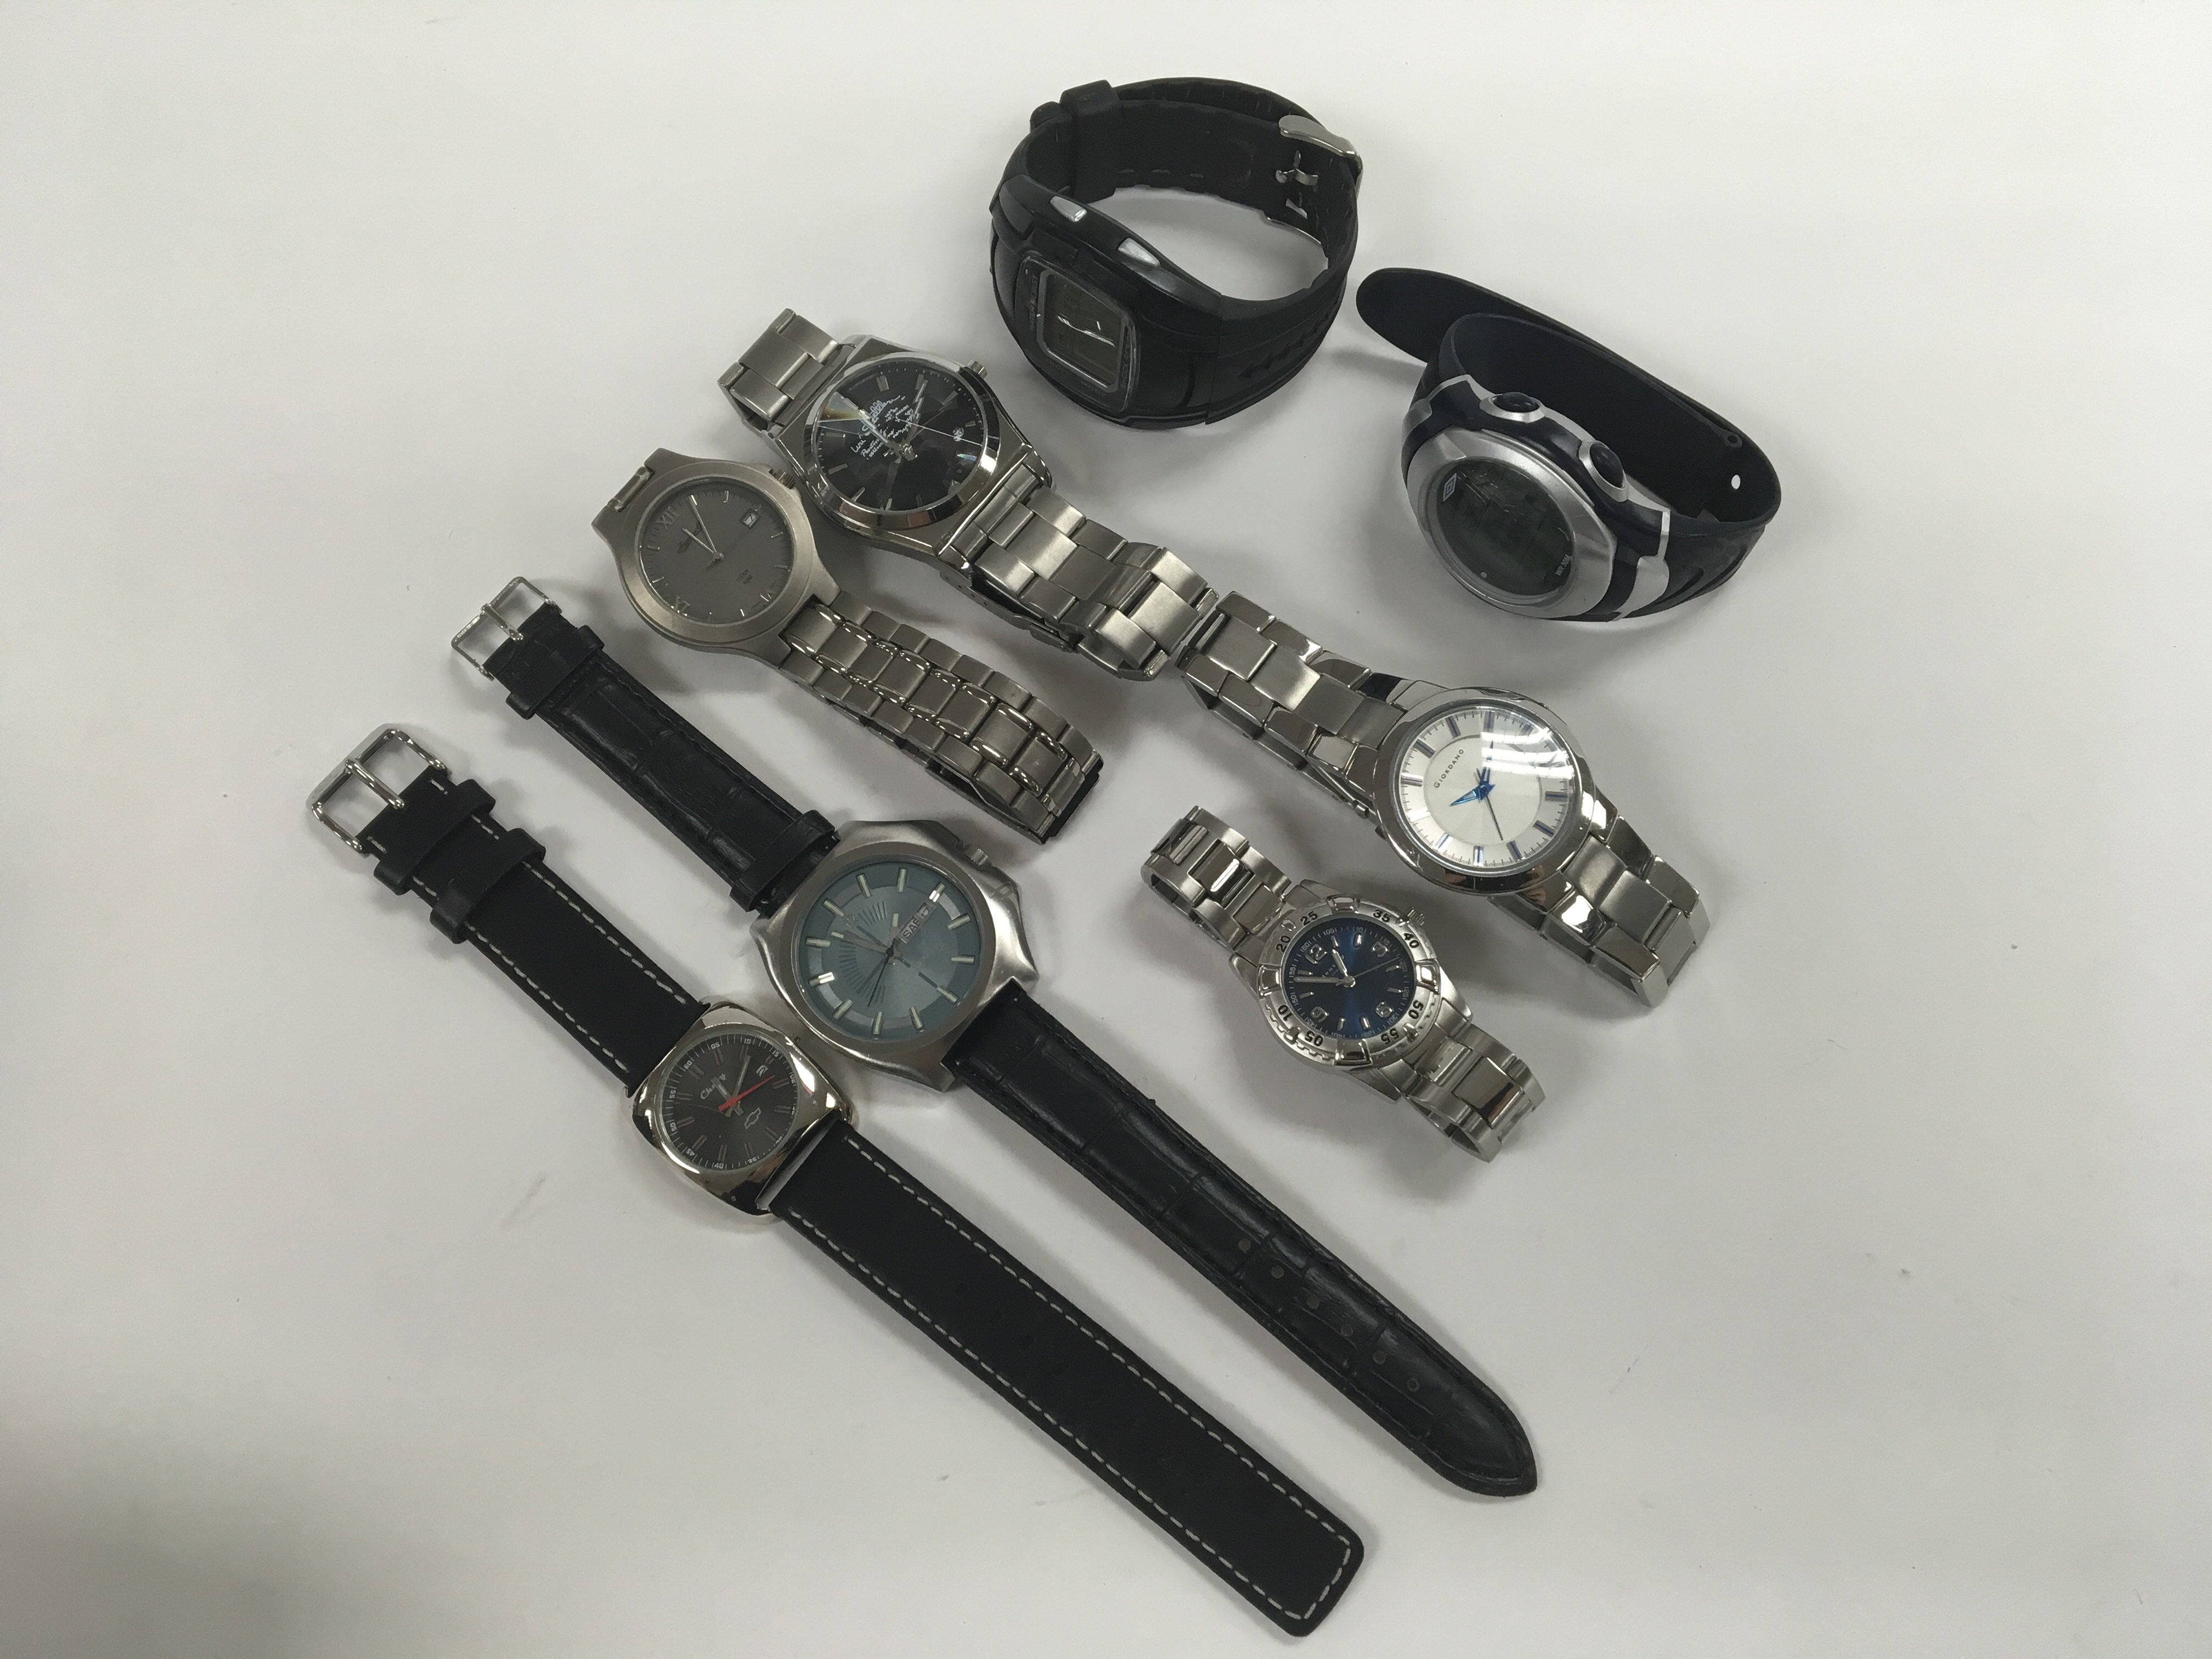 A mixed bag of watches including Diesel & Ingersol